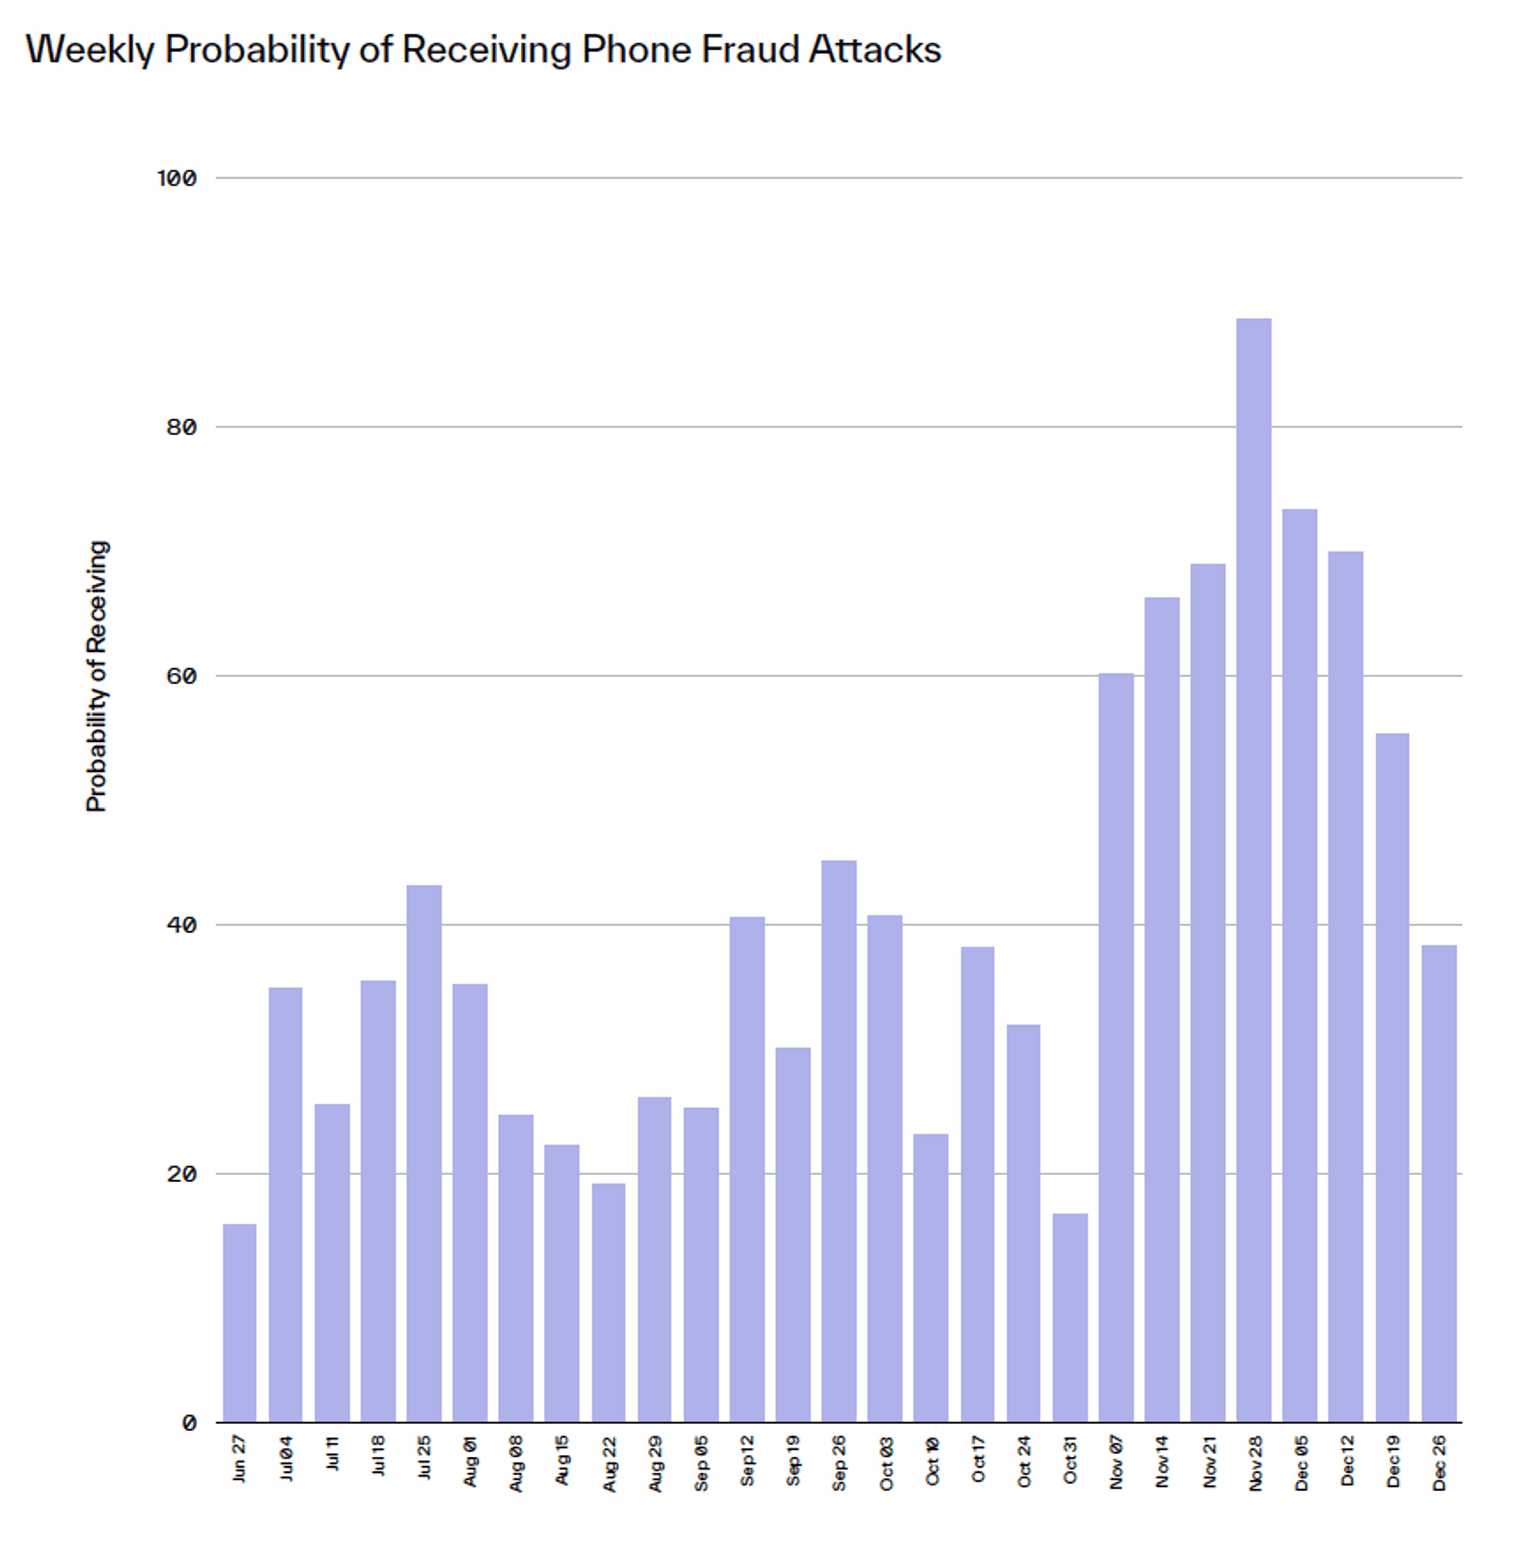 Probability of receiving a phone fraud attack by week